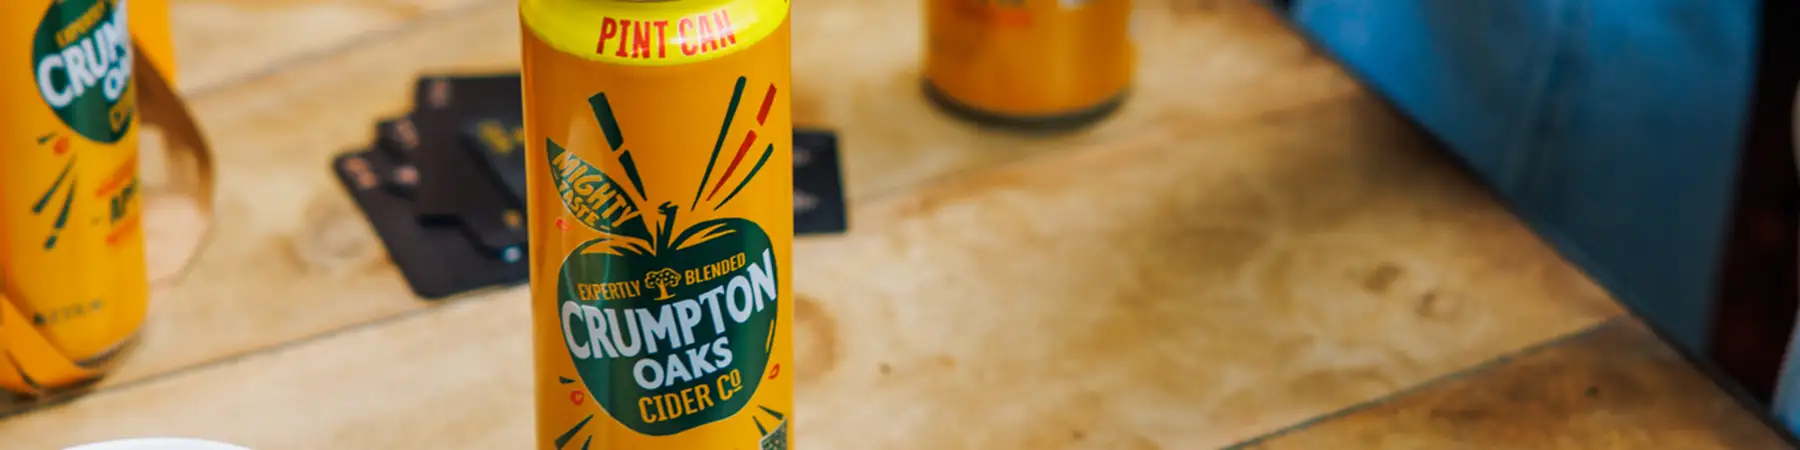 can of crumpton oaks cider on table